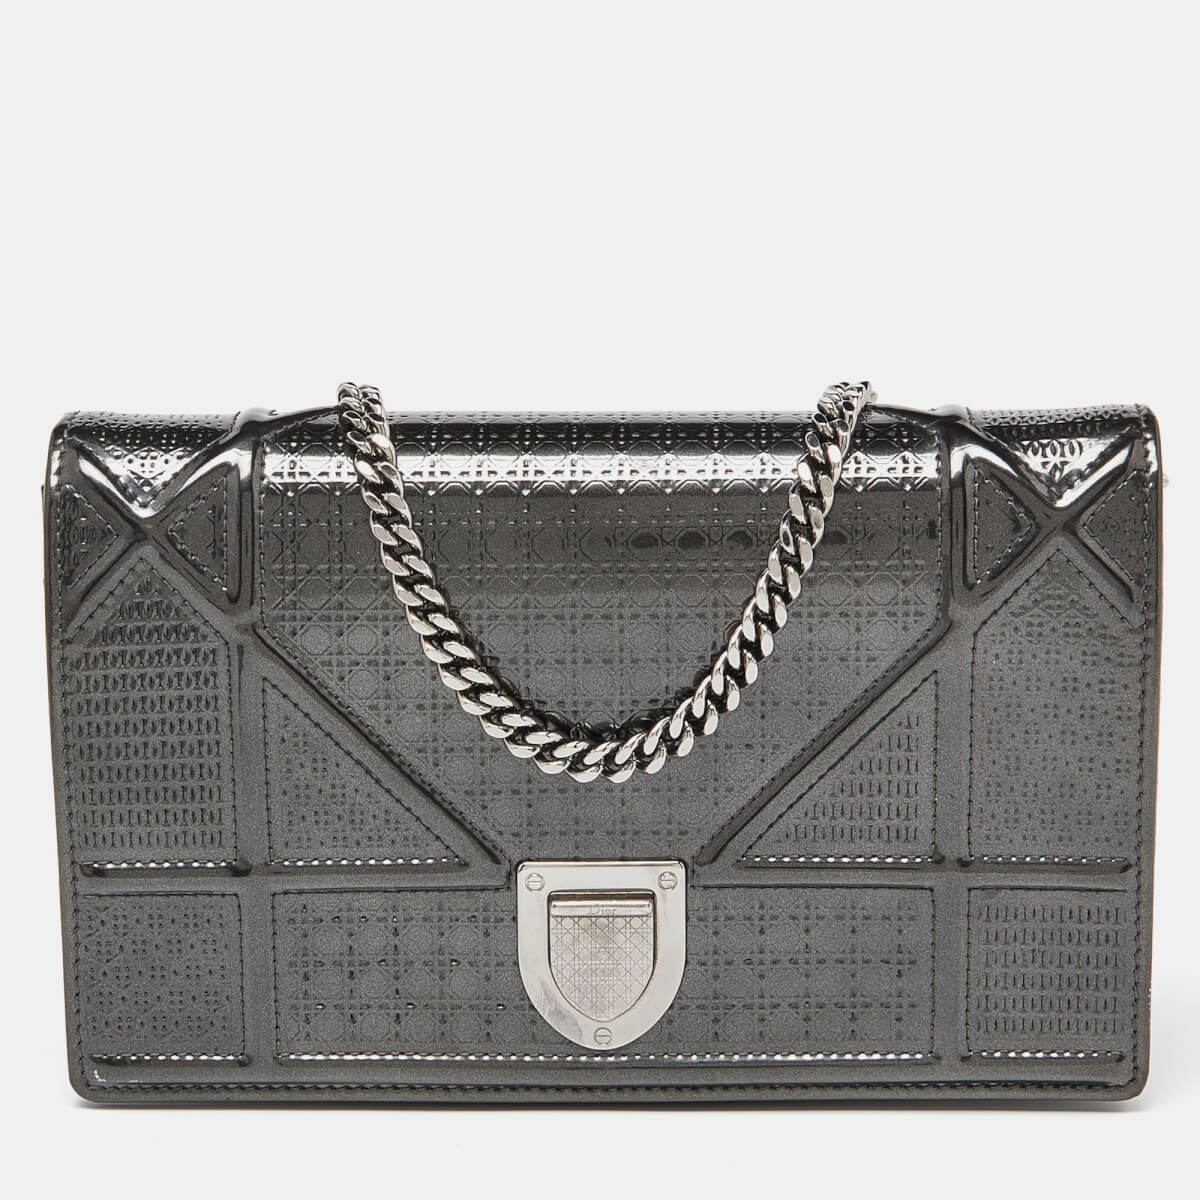 Dior Grey Micro Cannage Patent Leather Diorama Wallet On Chain